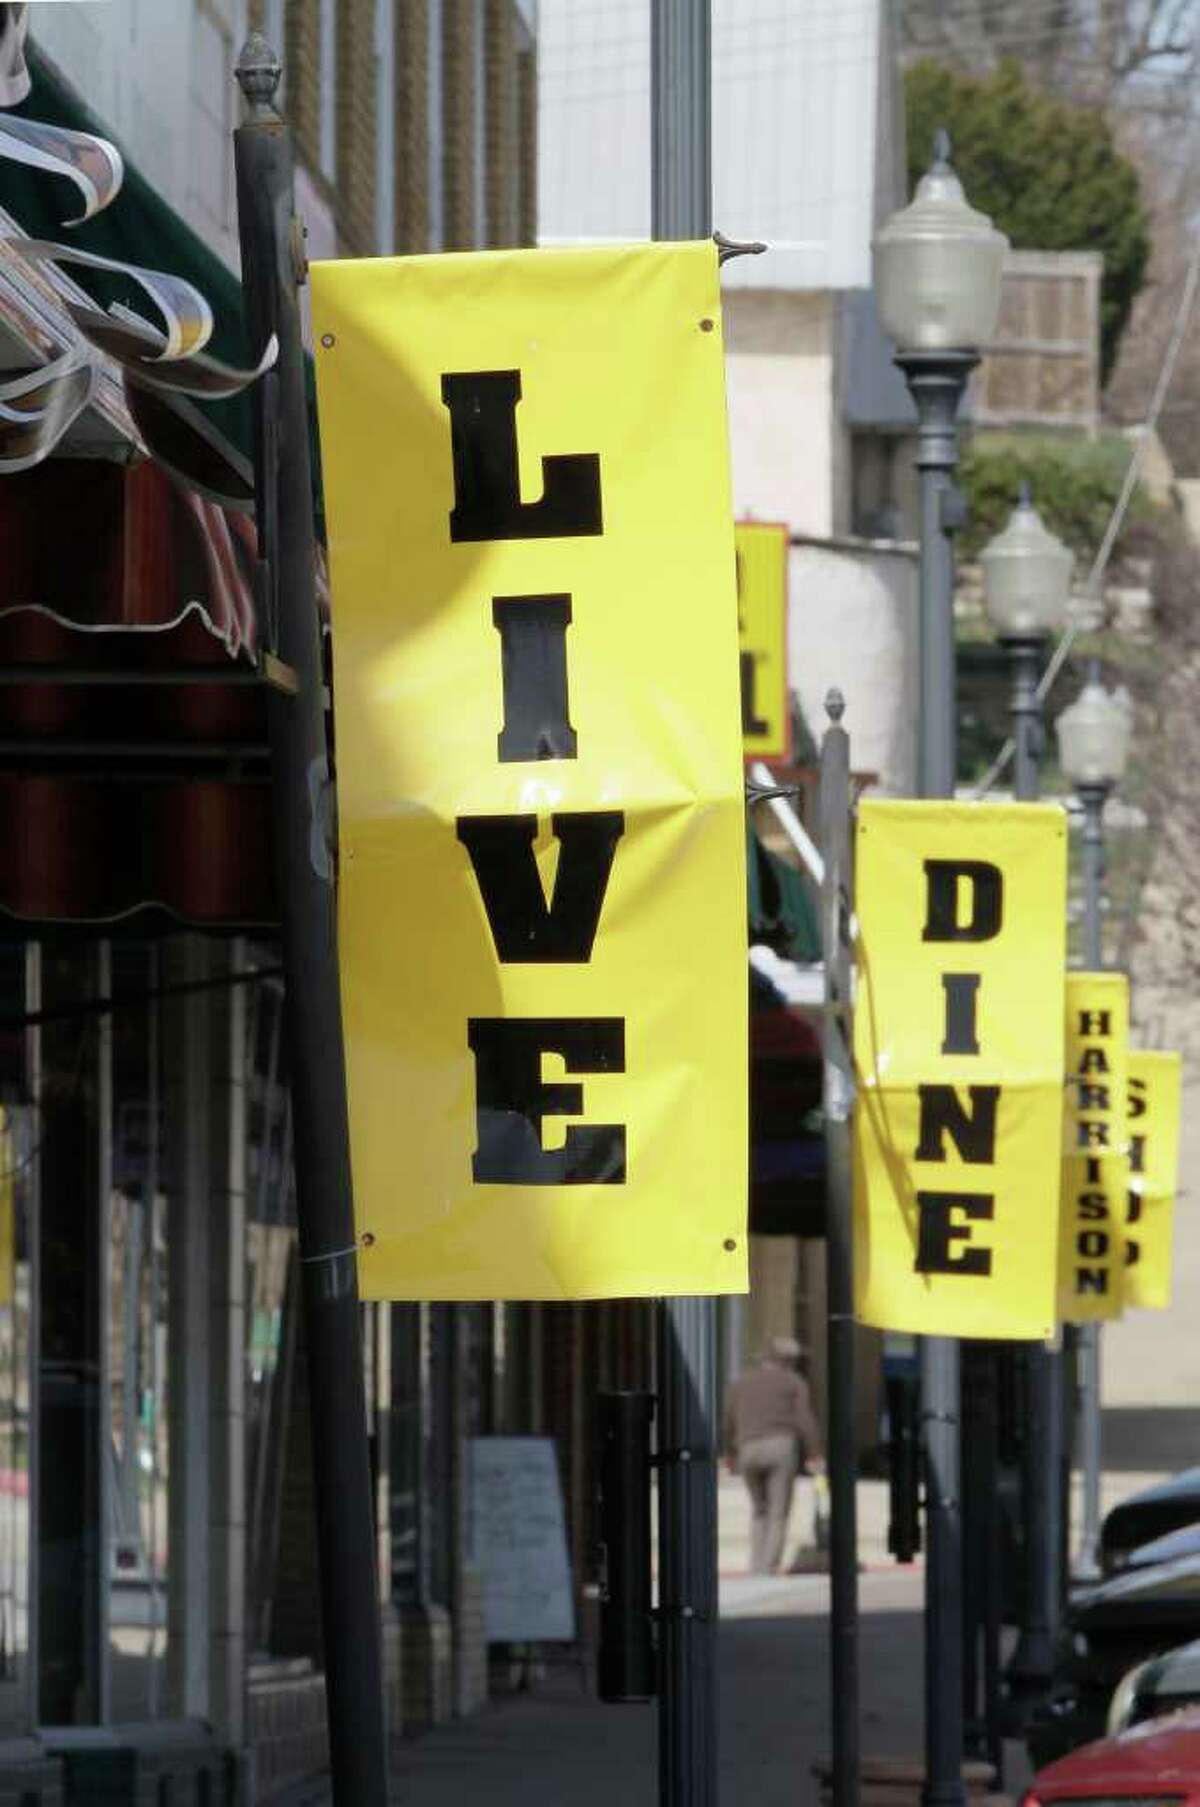 In this March 1, 2012 photo, banners line the town square in Harrison, Ark. Some residents are trying to overcome the town's reputation, earned after race riots in 1905 and 1909, when most black people were run out of town. More than a century later, only 34 of the nearly 13, 000 residents in Harrison are black. But the town hopes that a better image will attract more residents and businesses. (AP Photo/Danny Johnston)